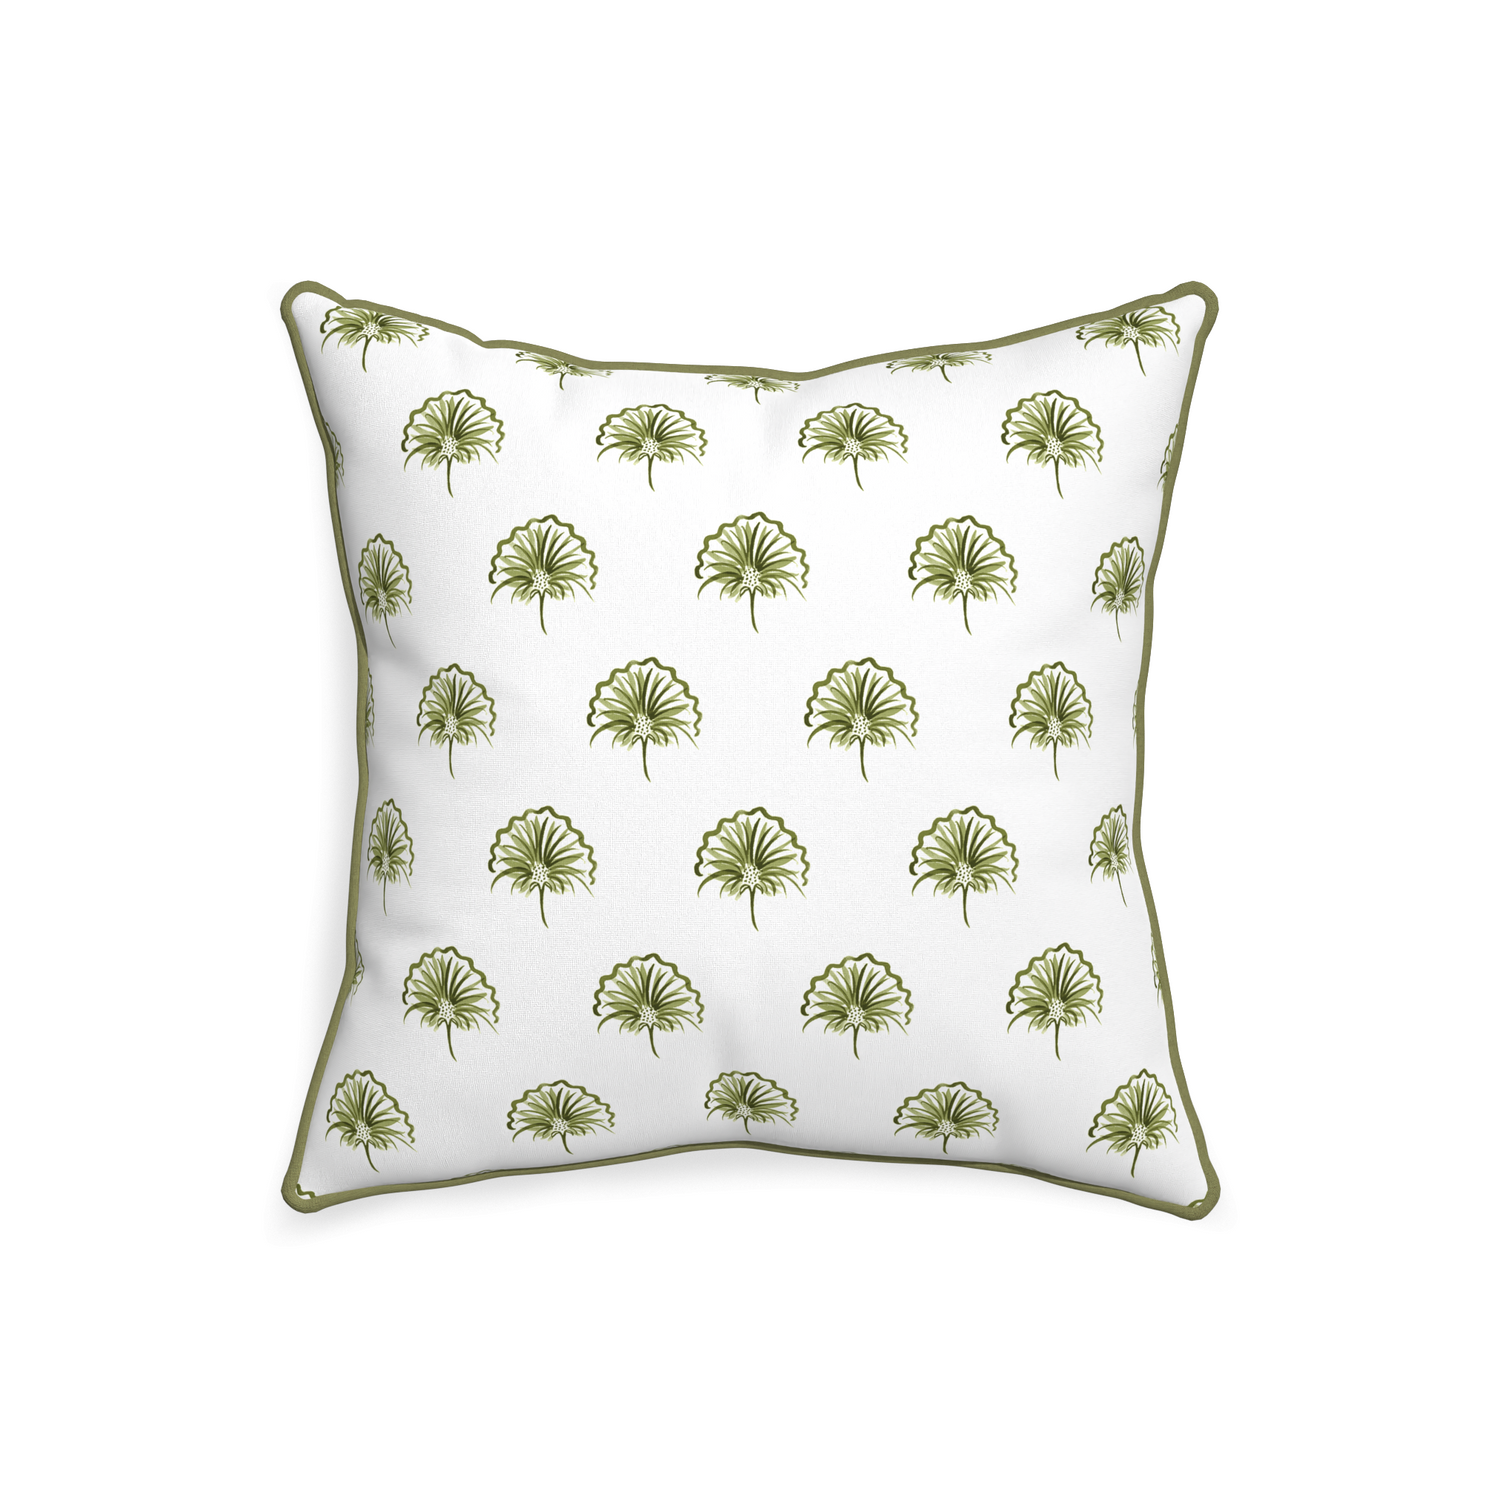 20-square penelope moss custom pillow with moss piping on white background